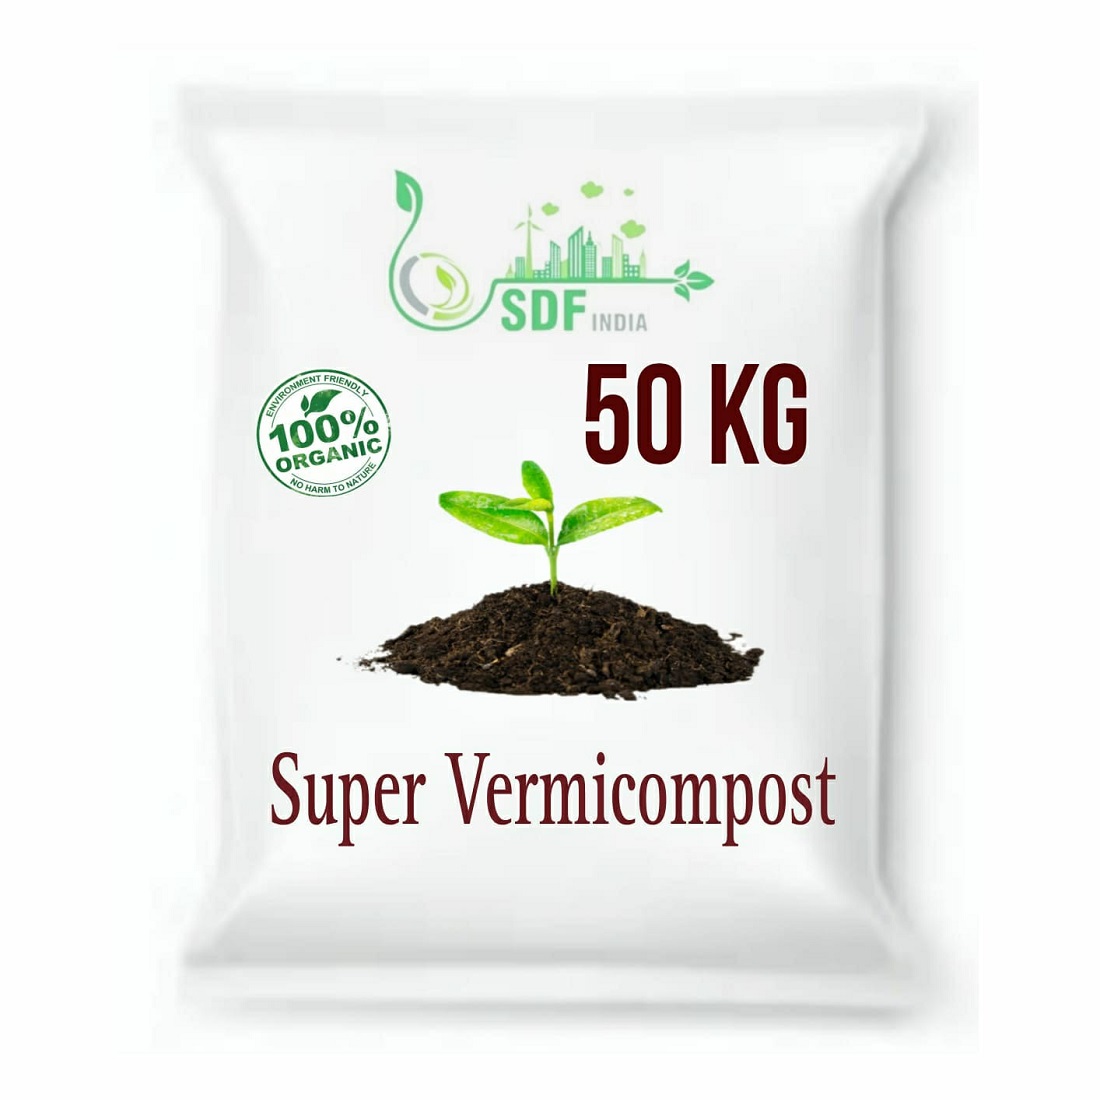 SDF India Super Vermicompost for All Kinds of Plants Complete Food for The Soil, Enriched with, Organic (50KG)